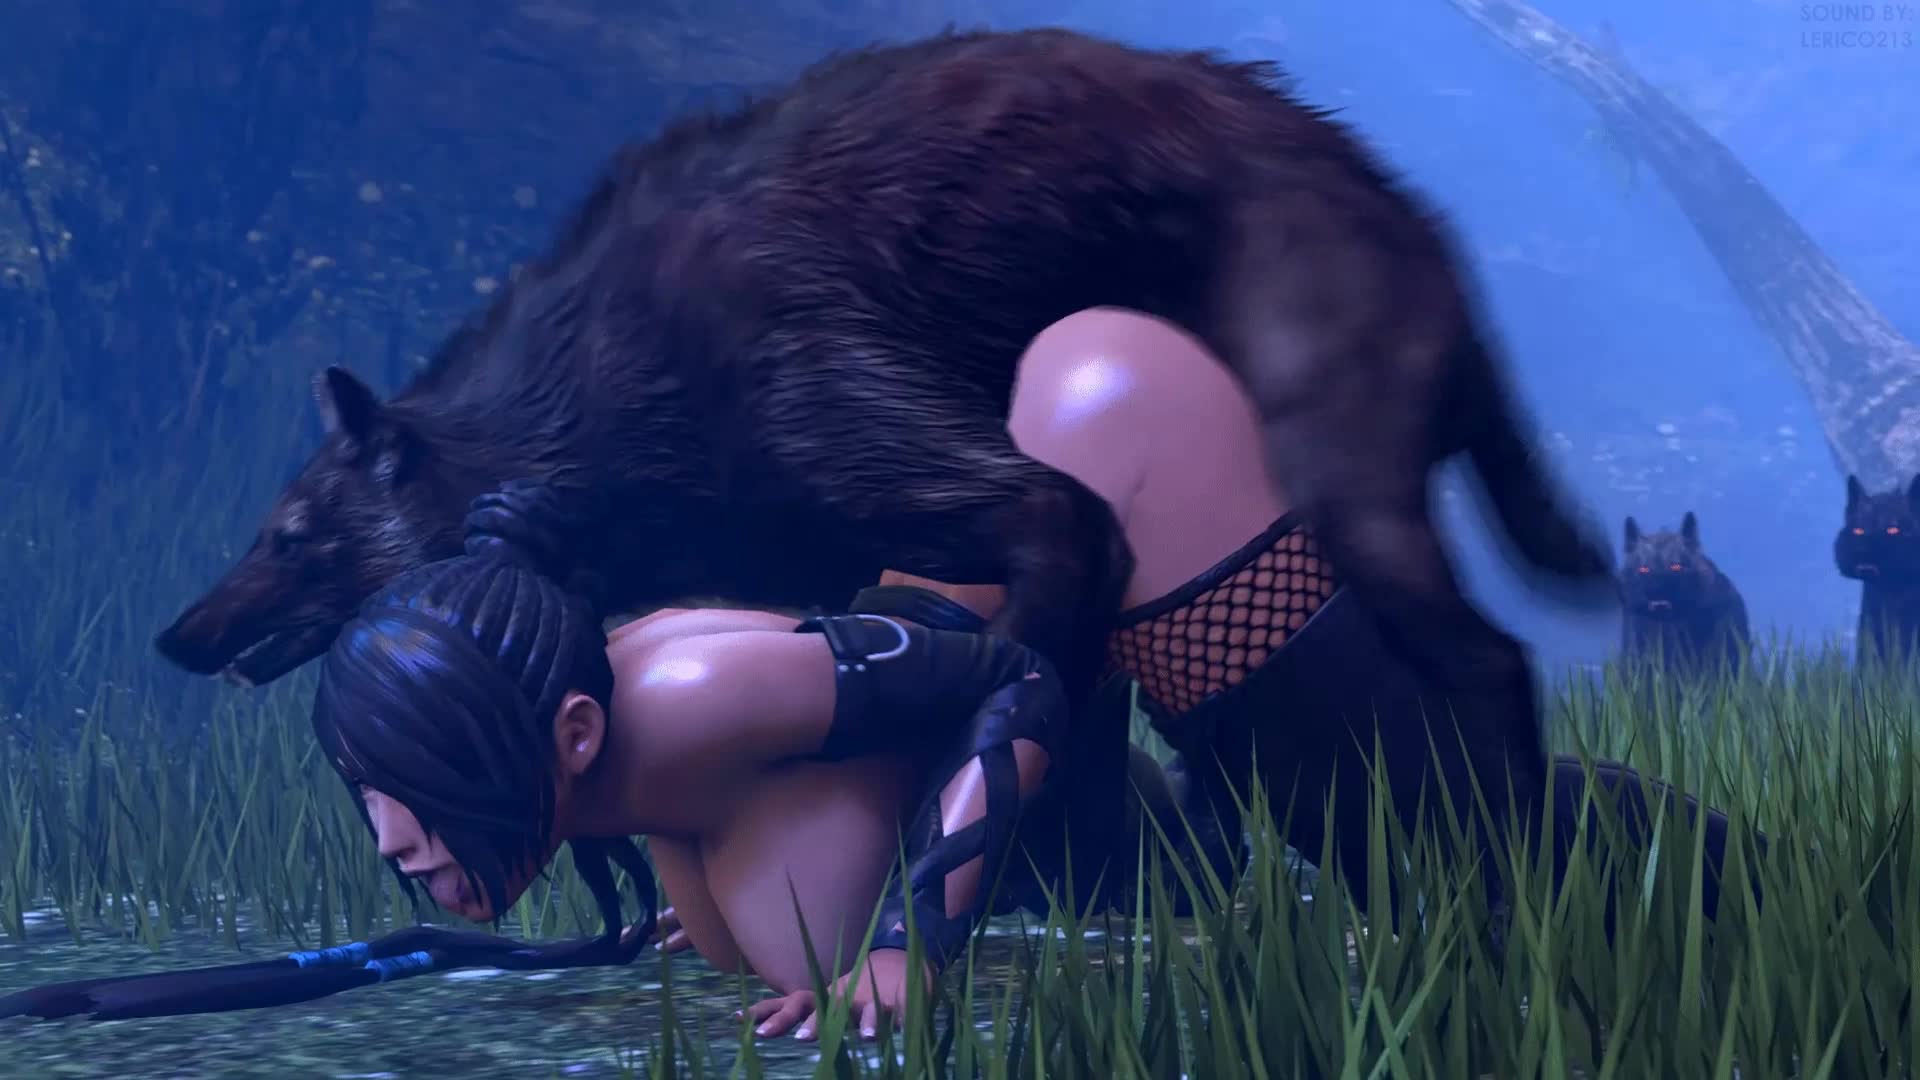 Lulu Gets Wolf Dick From Behind – Final Fantasy NSFW animation thumbnail